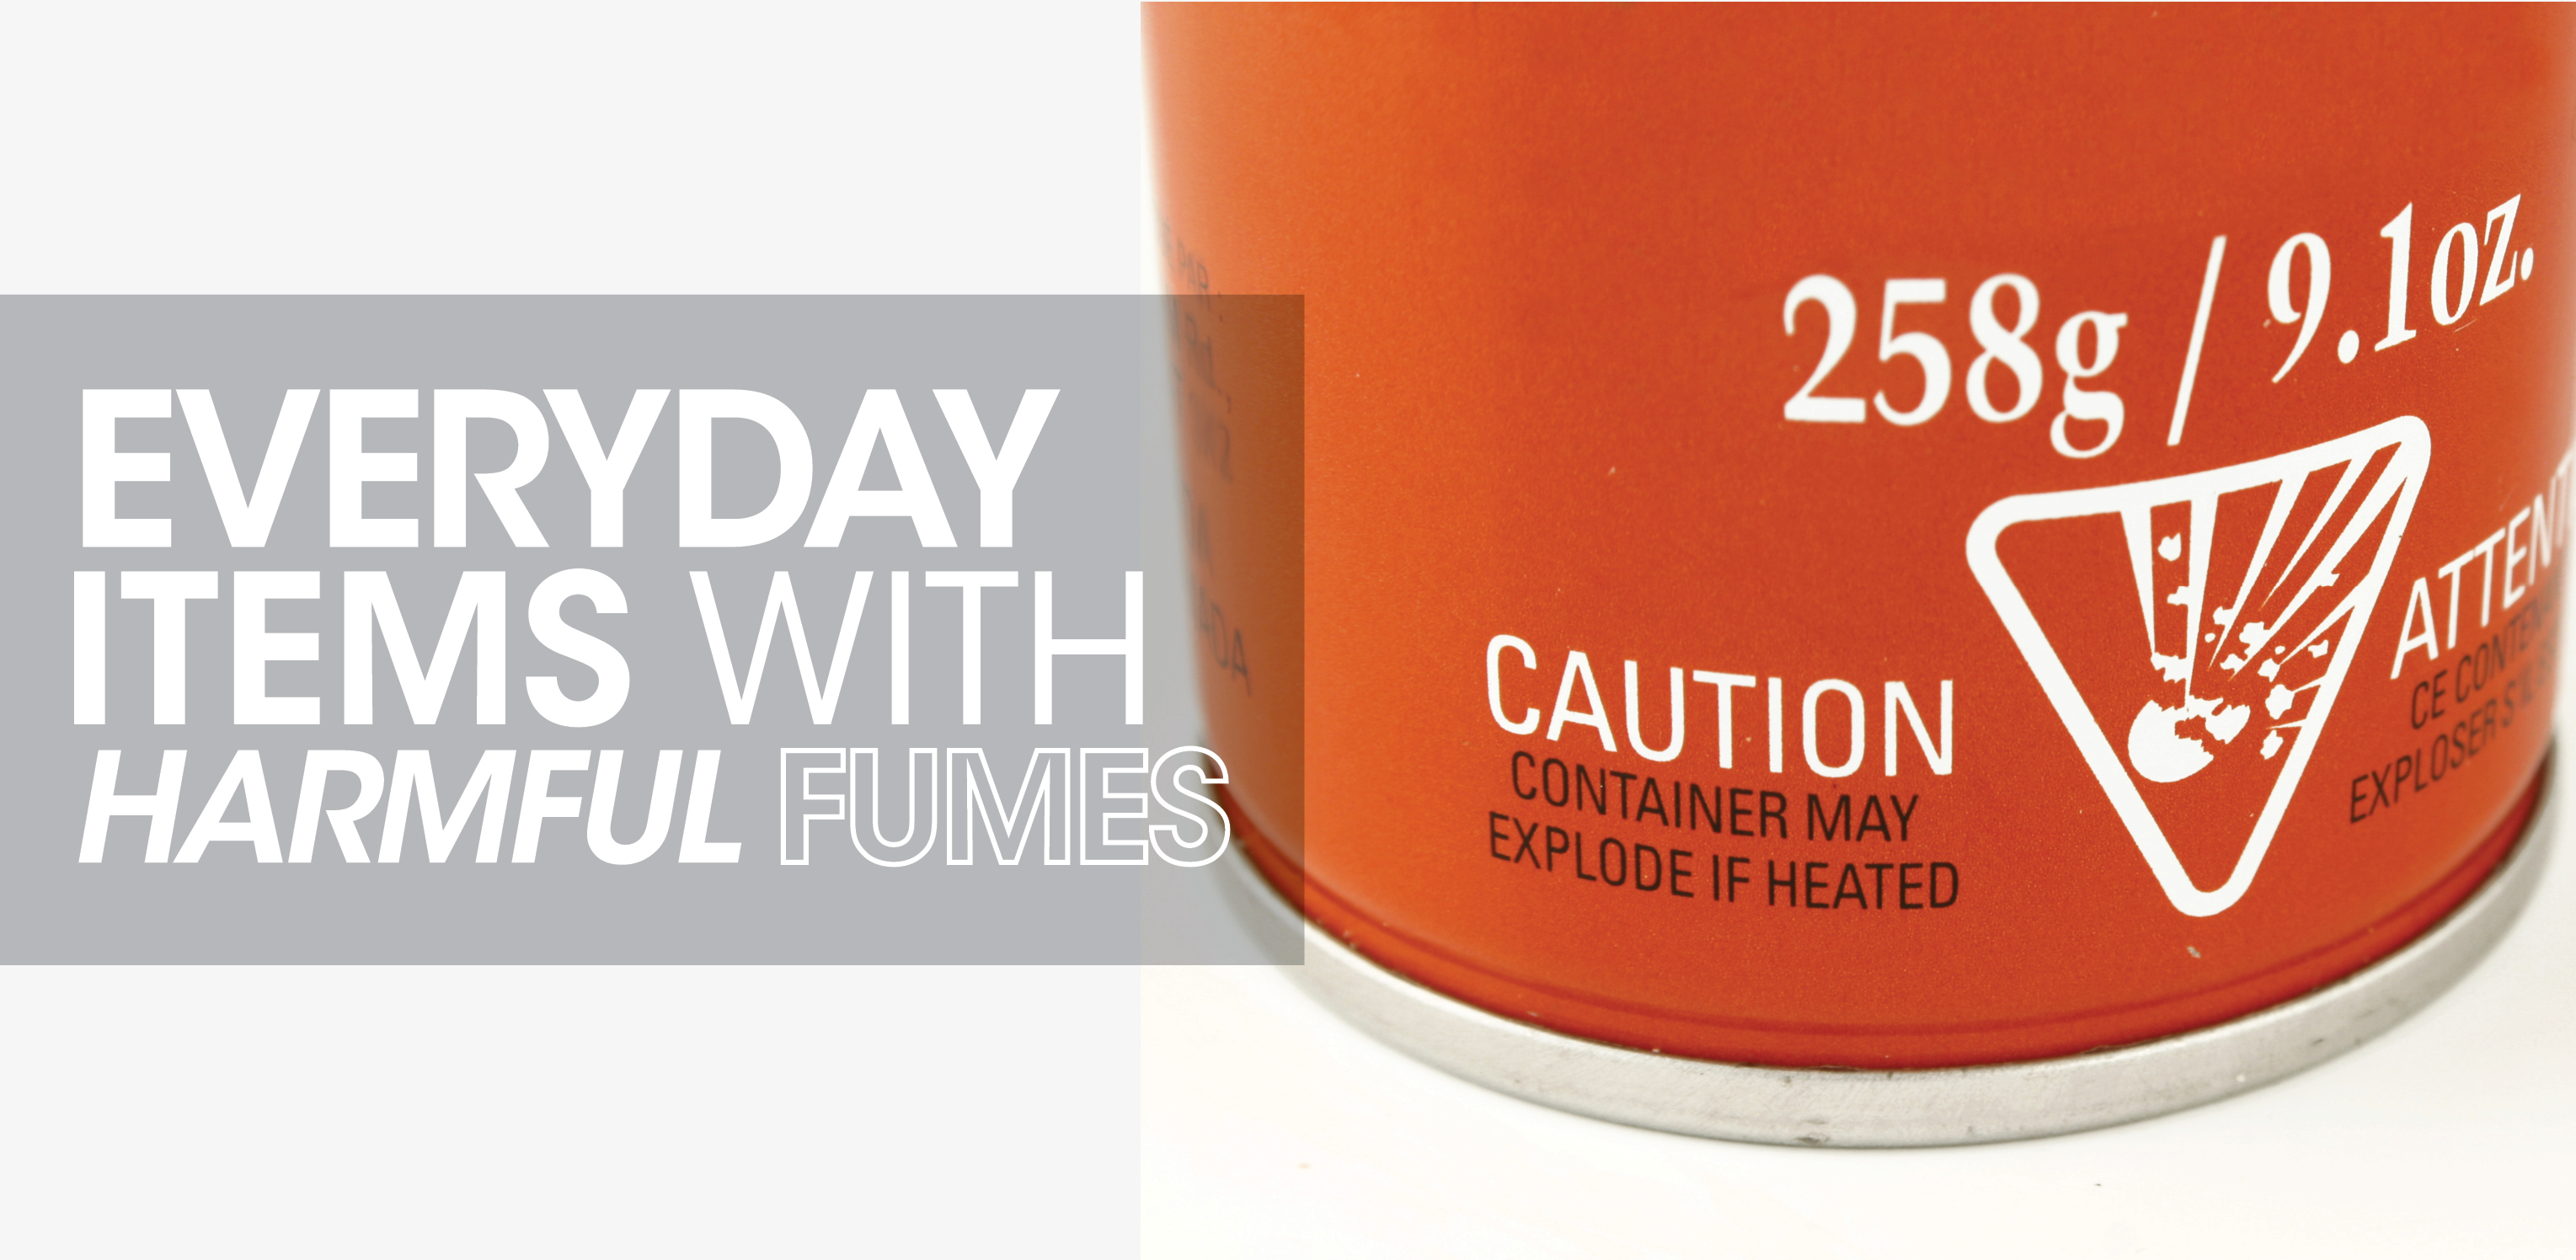 Caution warning with text: "everyday items with harmful fumes"